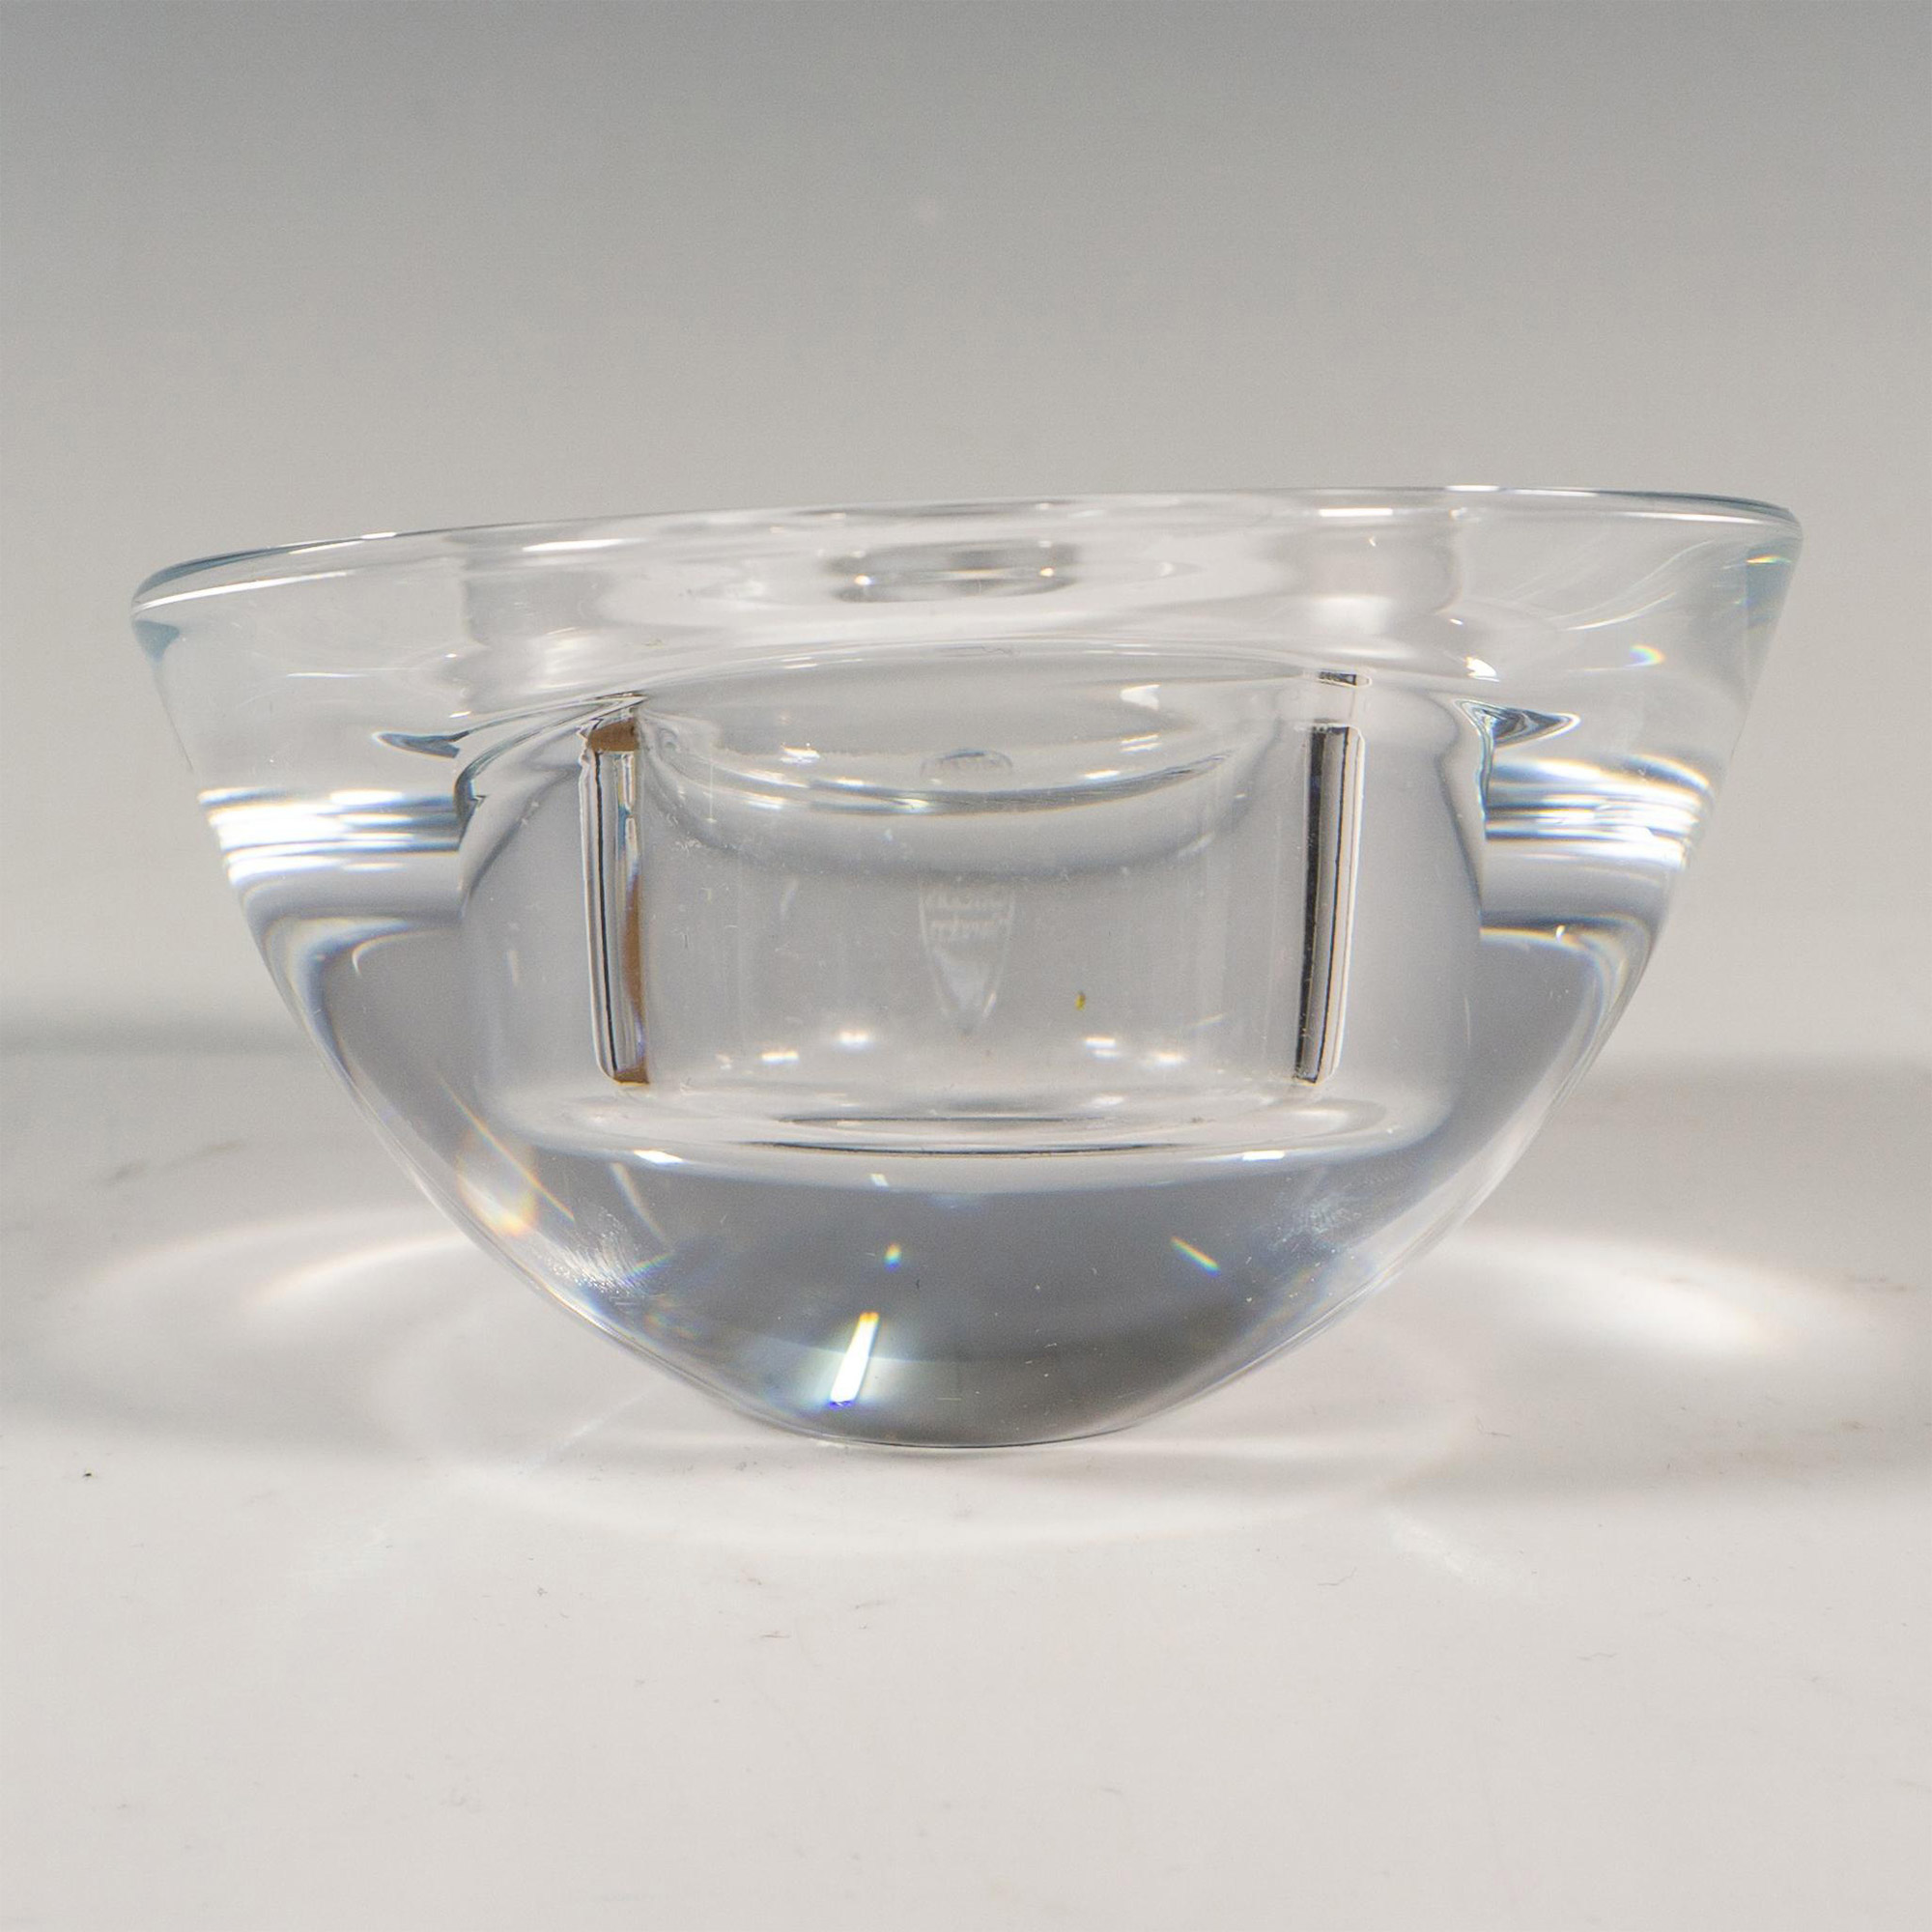 Orrefors by Lena Bergstrom Crystal Candle Holder, Delight - Image 2 of 3